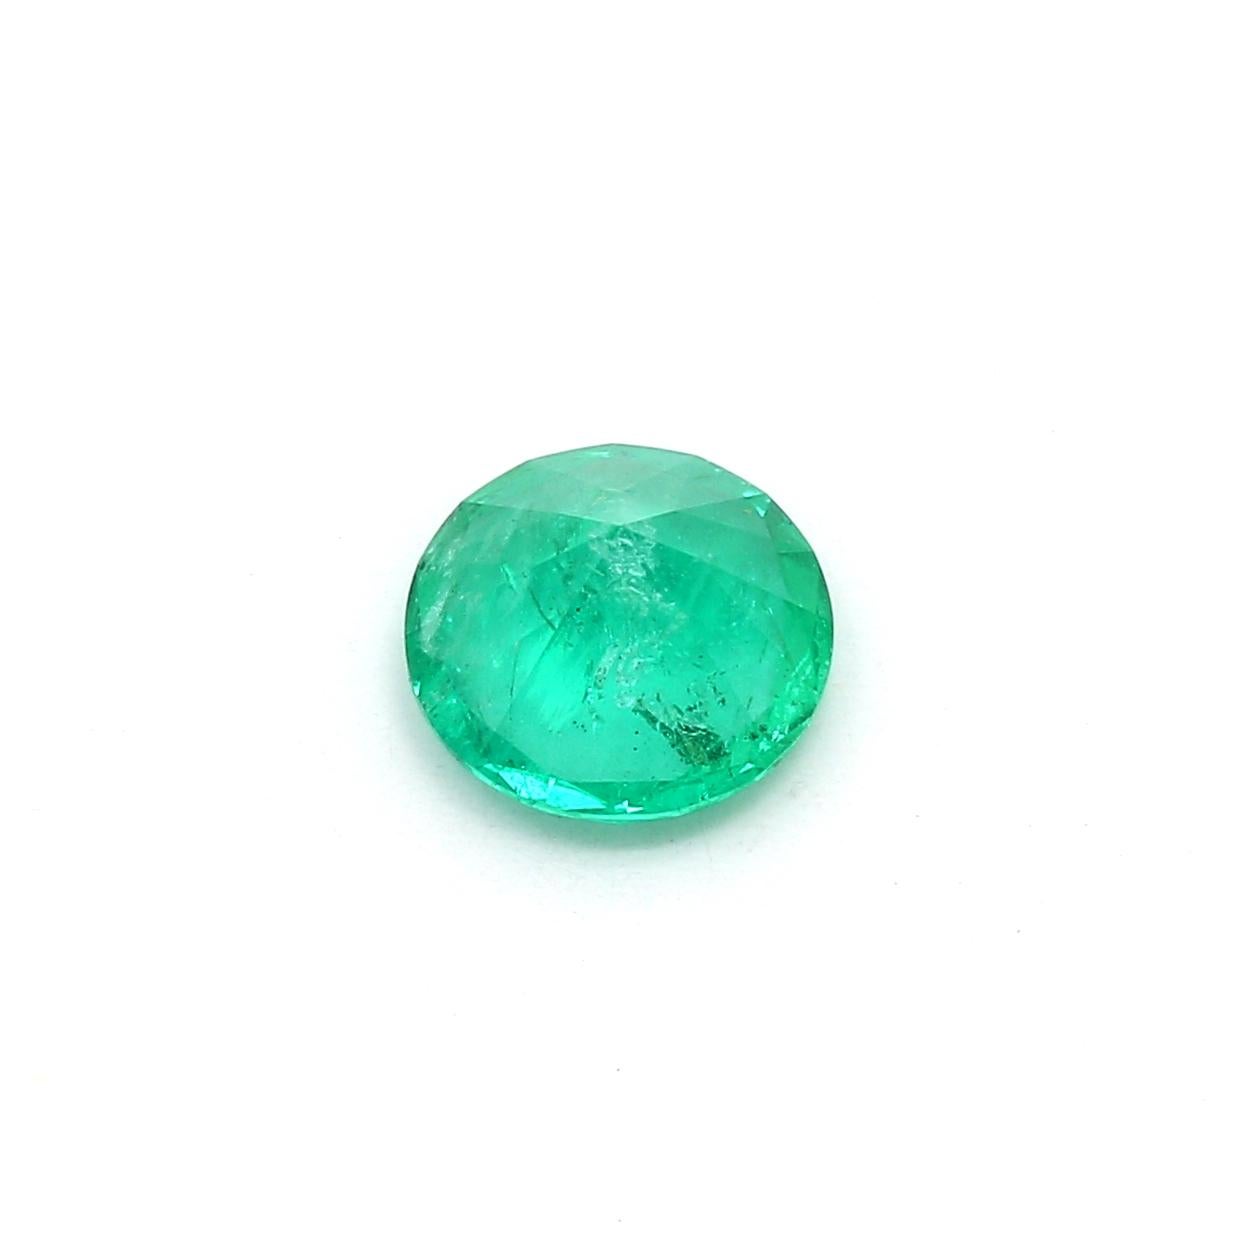 An amazing Russian Emerald in round shape which allows jewelers to create a unique piece of wearable art.
This exceptional quality gemstone would make a custom-made jewelry design. Perfect for a Ring or Pendant.

Shape - Round
Weight - 1.28